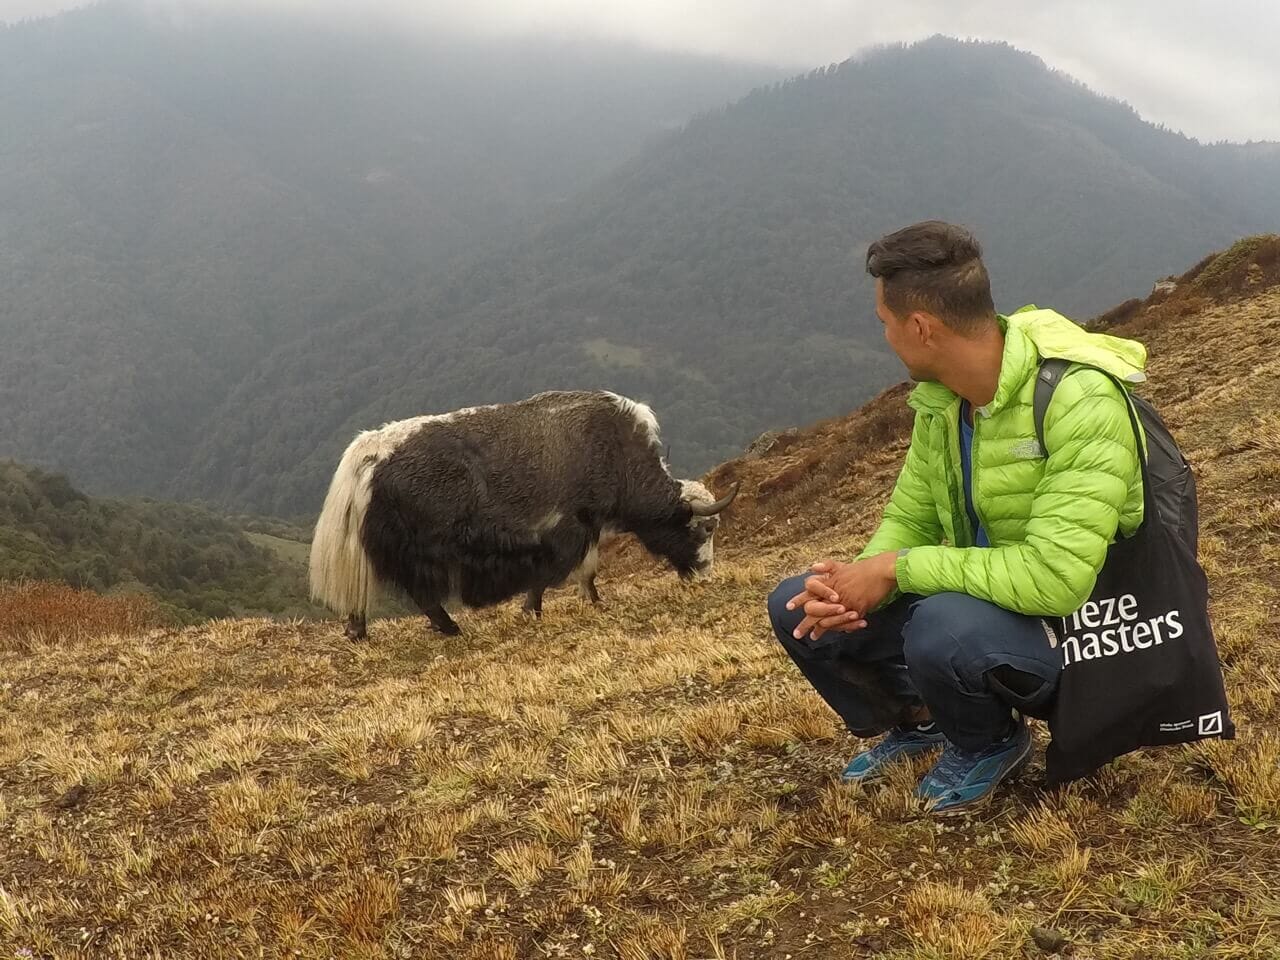 A man wearing a light-green jacket, blue pants and blue sneakers looking at a yak with some mountains in the background during a trek in Nepal